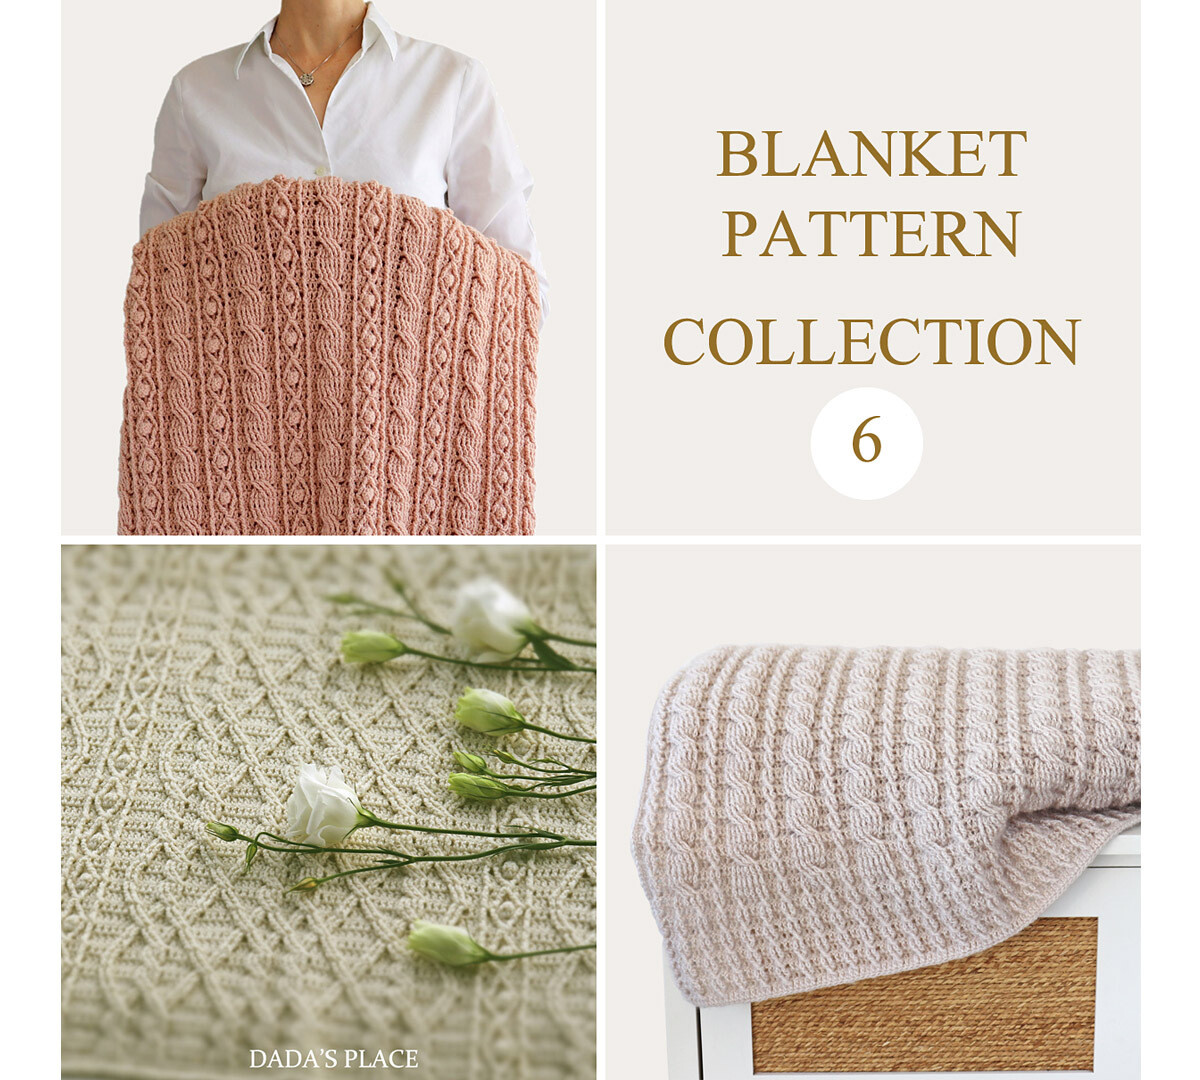 CROCHET BLANKET PATTERN COLLECTION 6